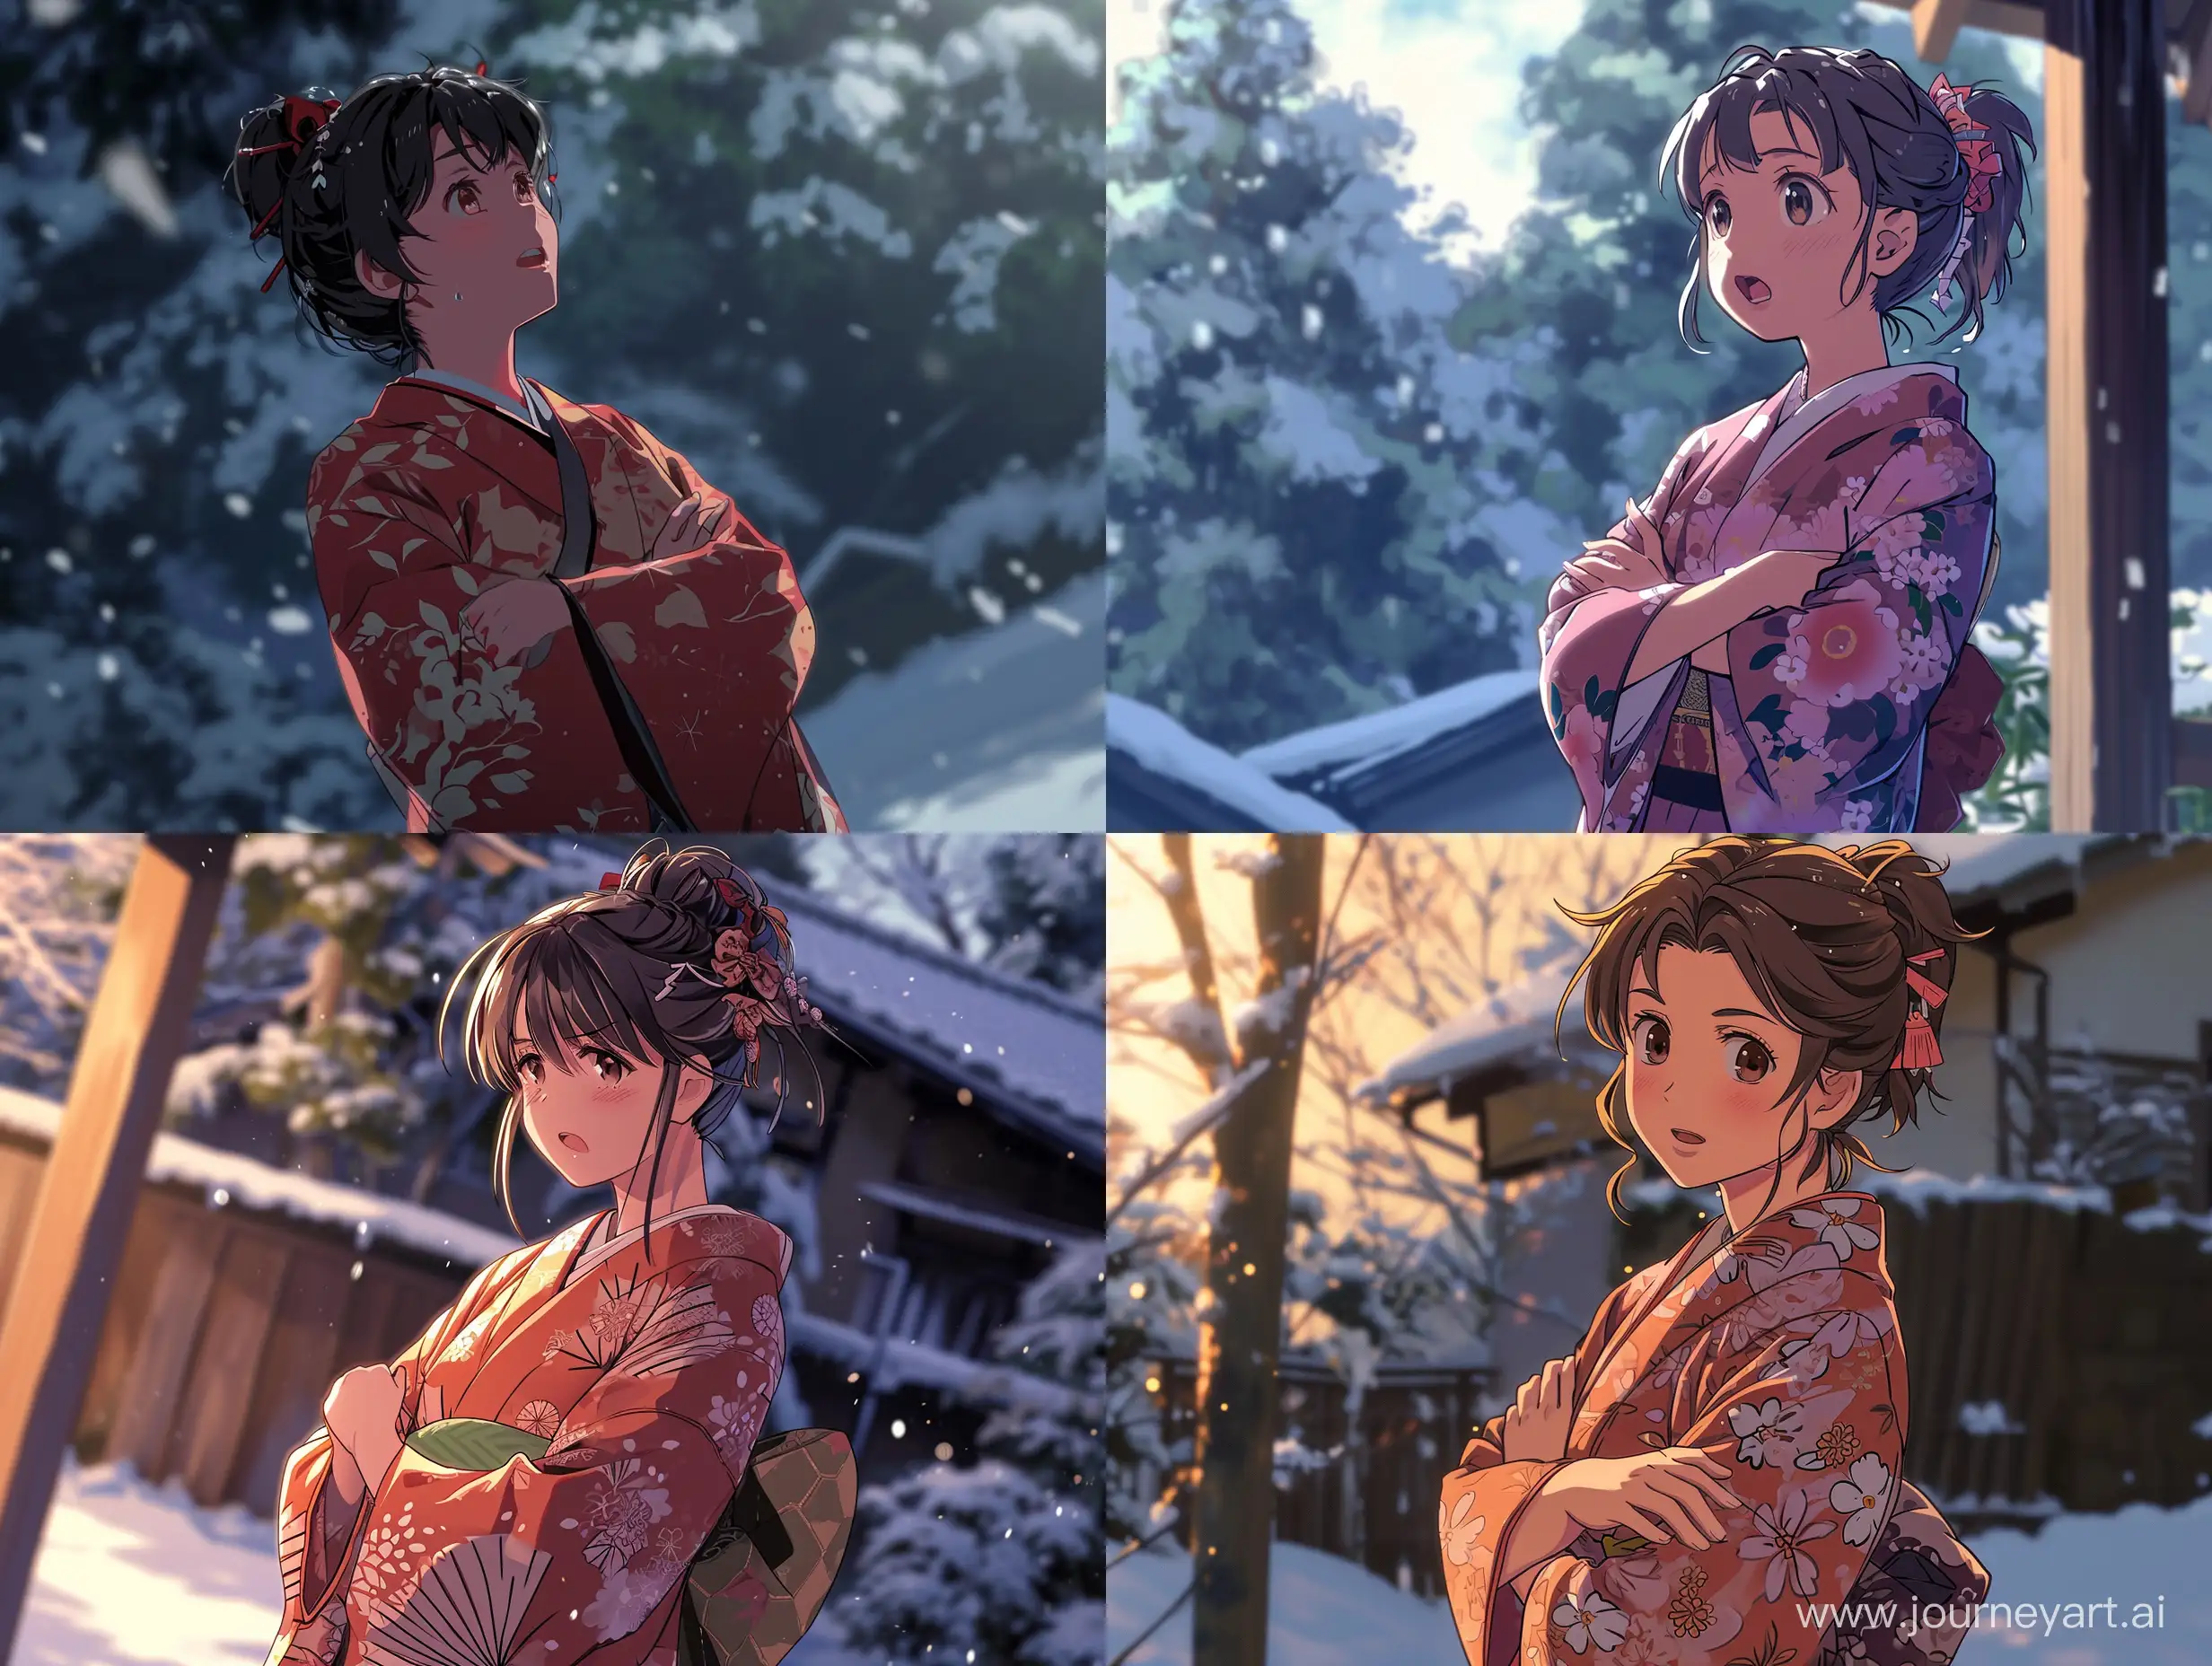 Elegant-Kimonoclad-Woman-with-Tsundere-Charm-in-a-Snowy-Morning-Scene